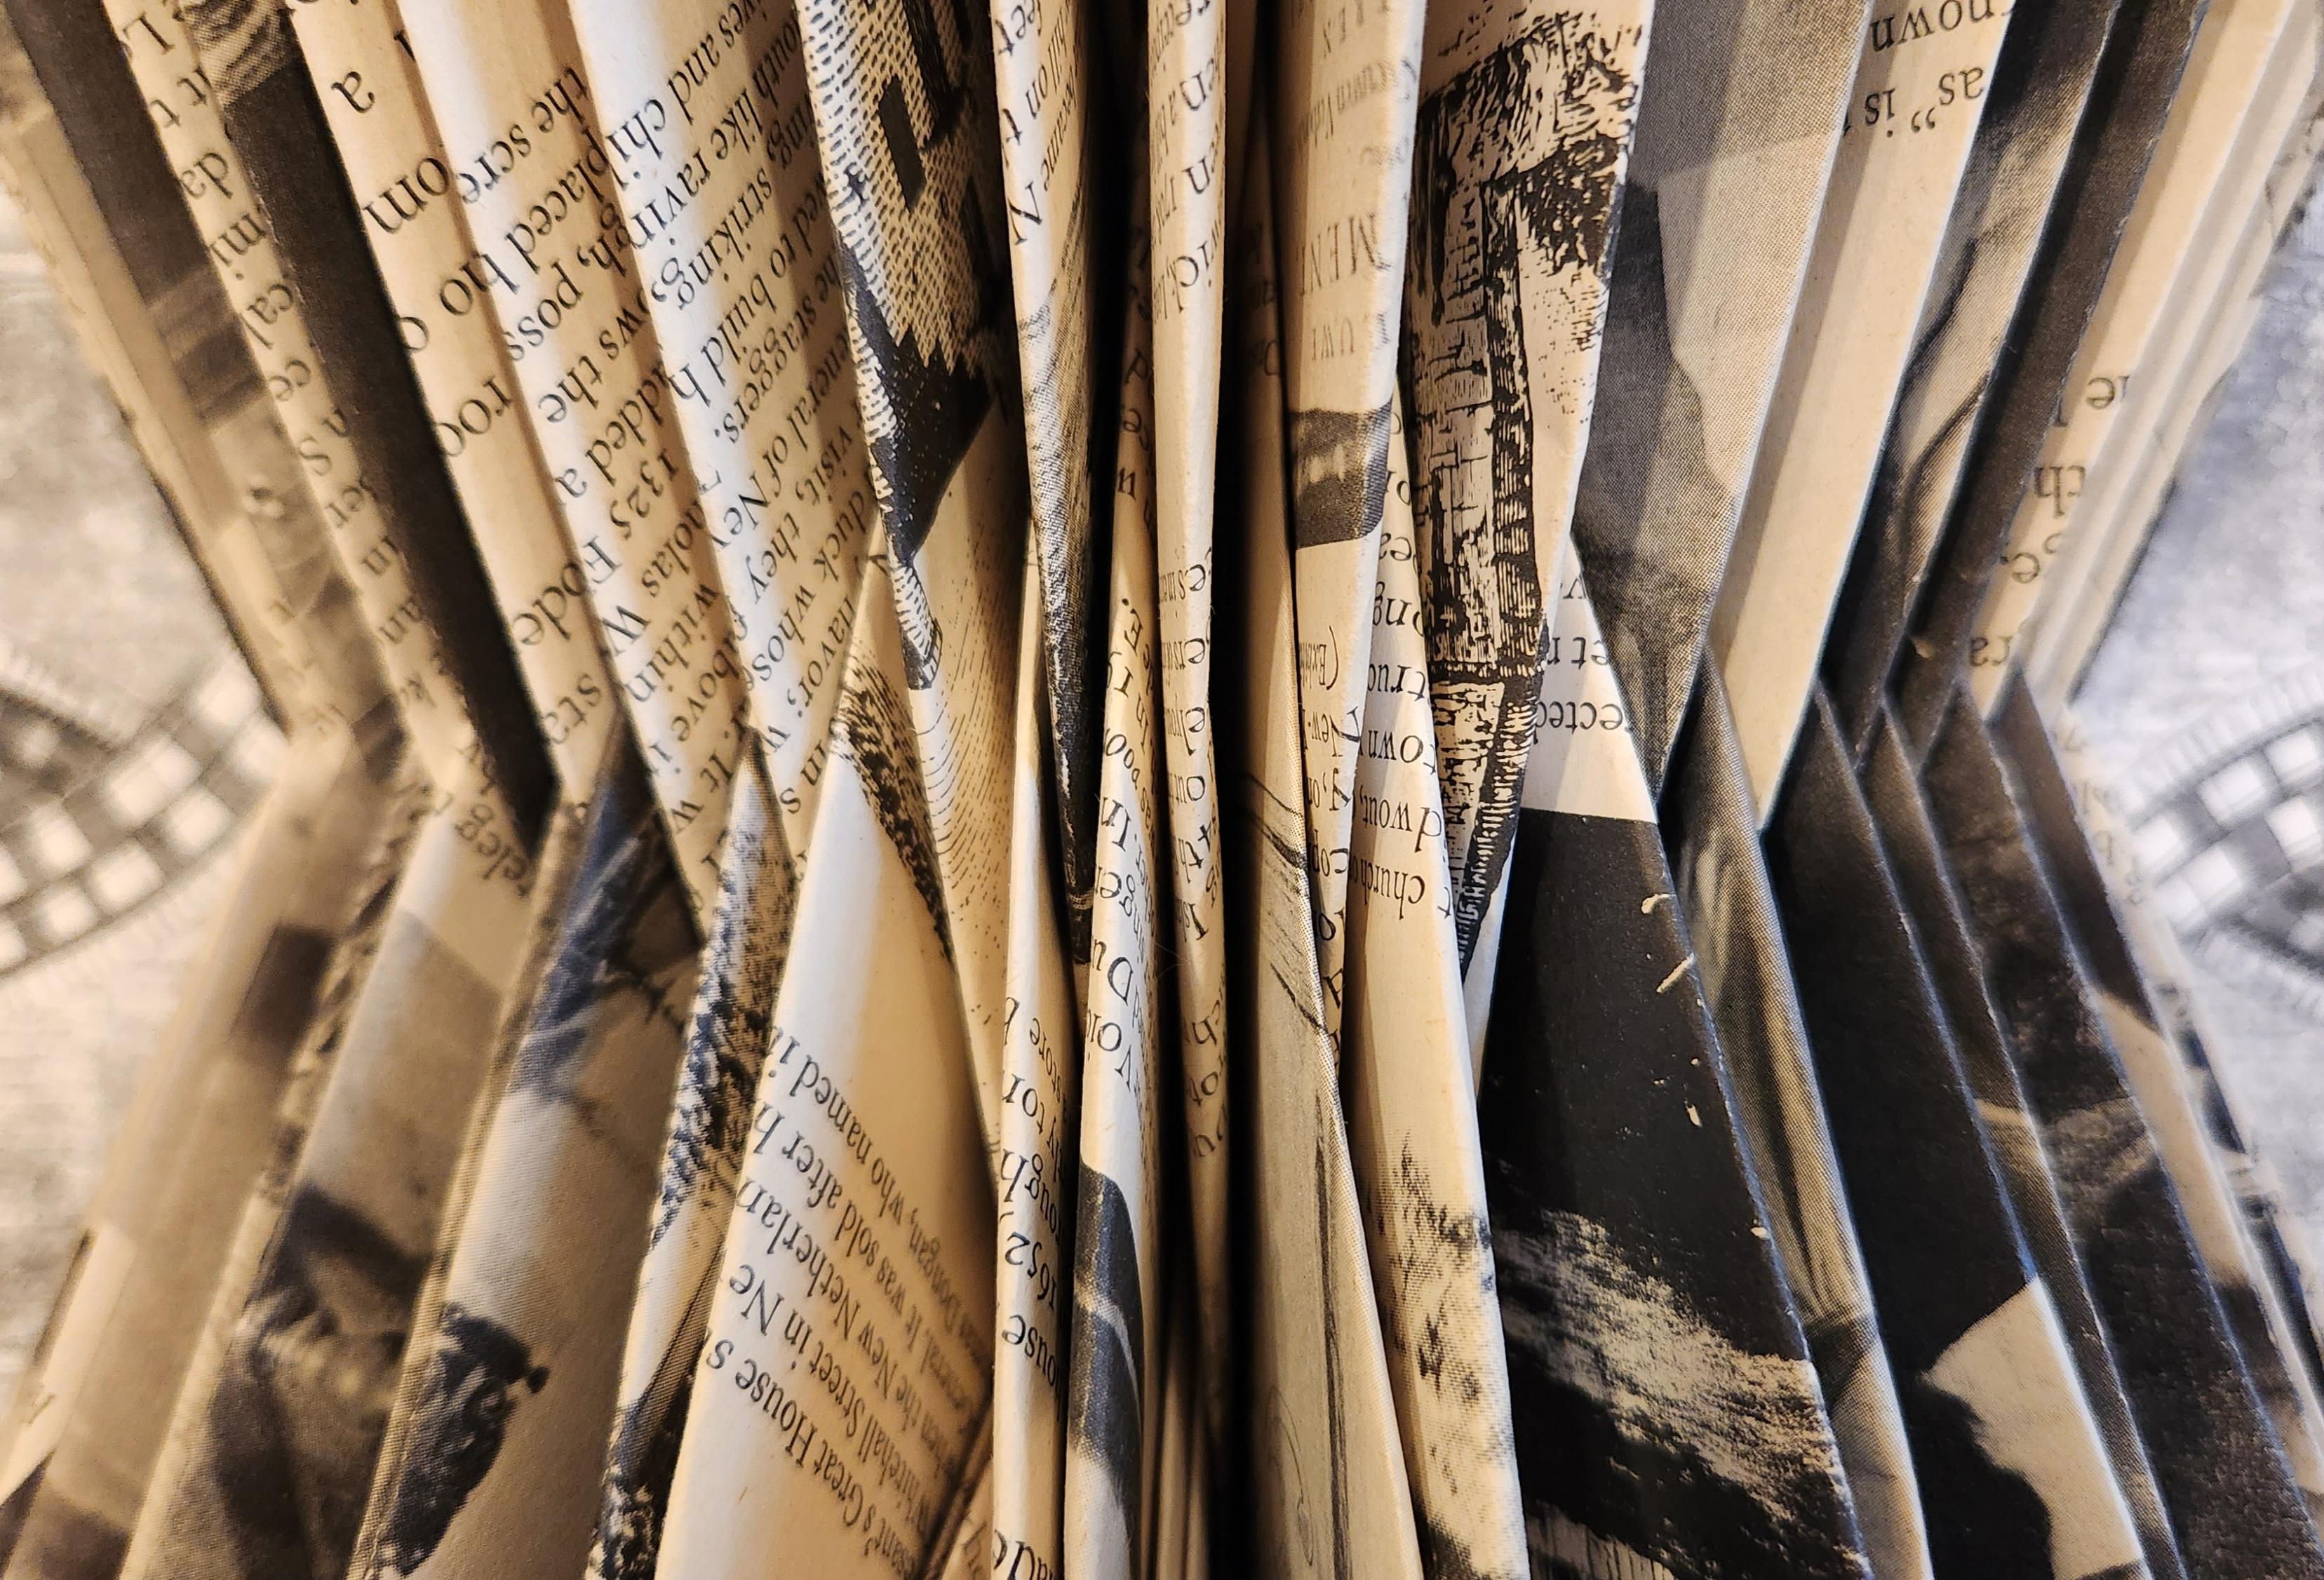 folded book art for sale